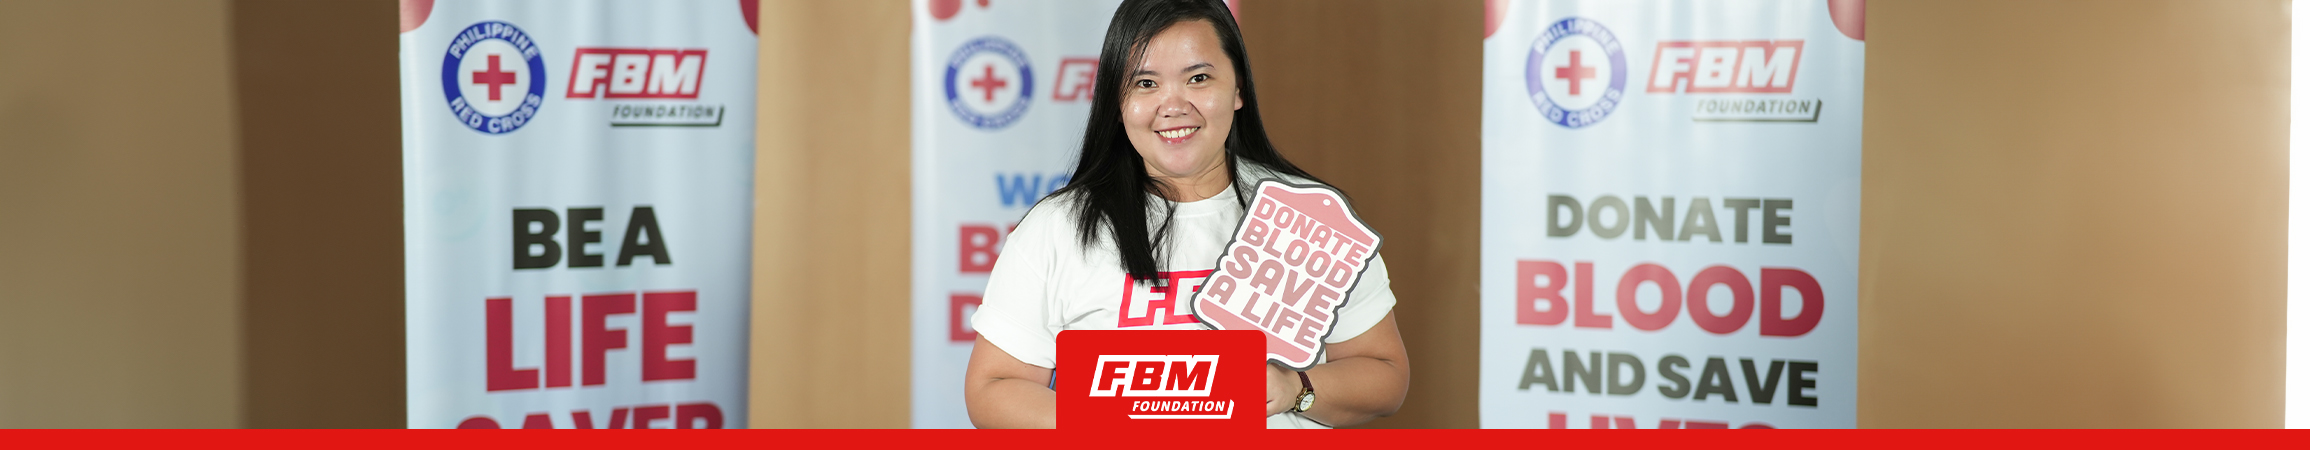 A Drop of Hope: FBM Foundation Embodies the Power of Giving with a Blood Donation Initiative in Pasig City